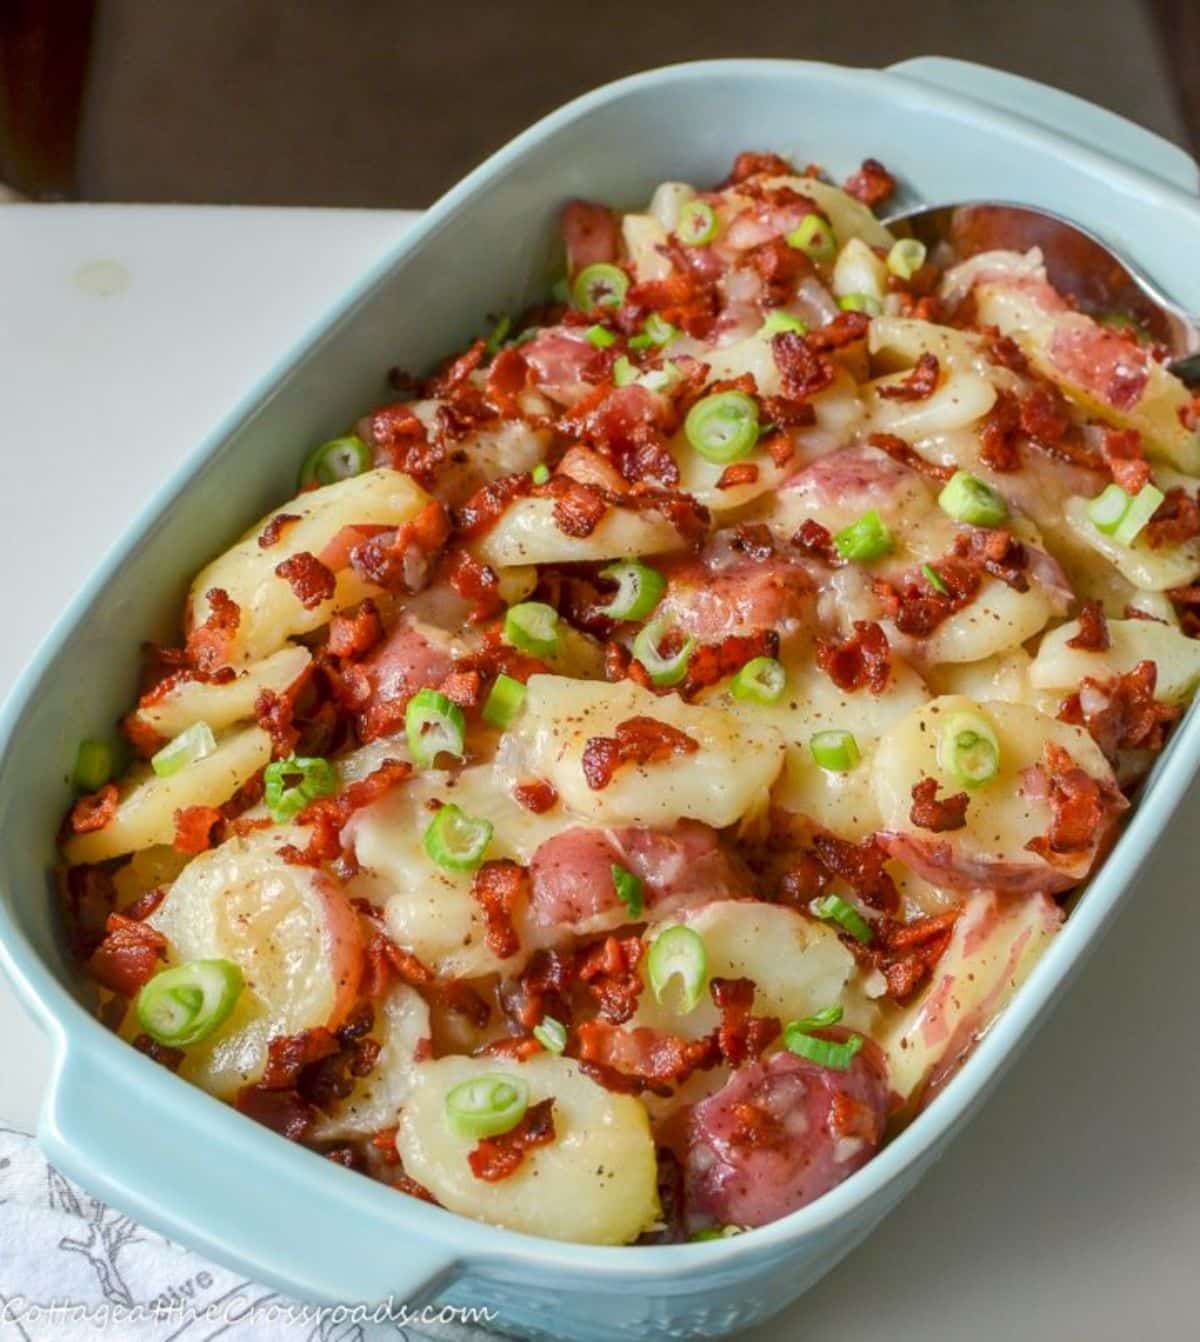 Warm german potato salad with bacon in a blue casserole.